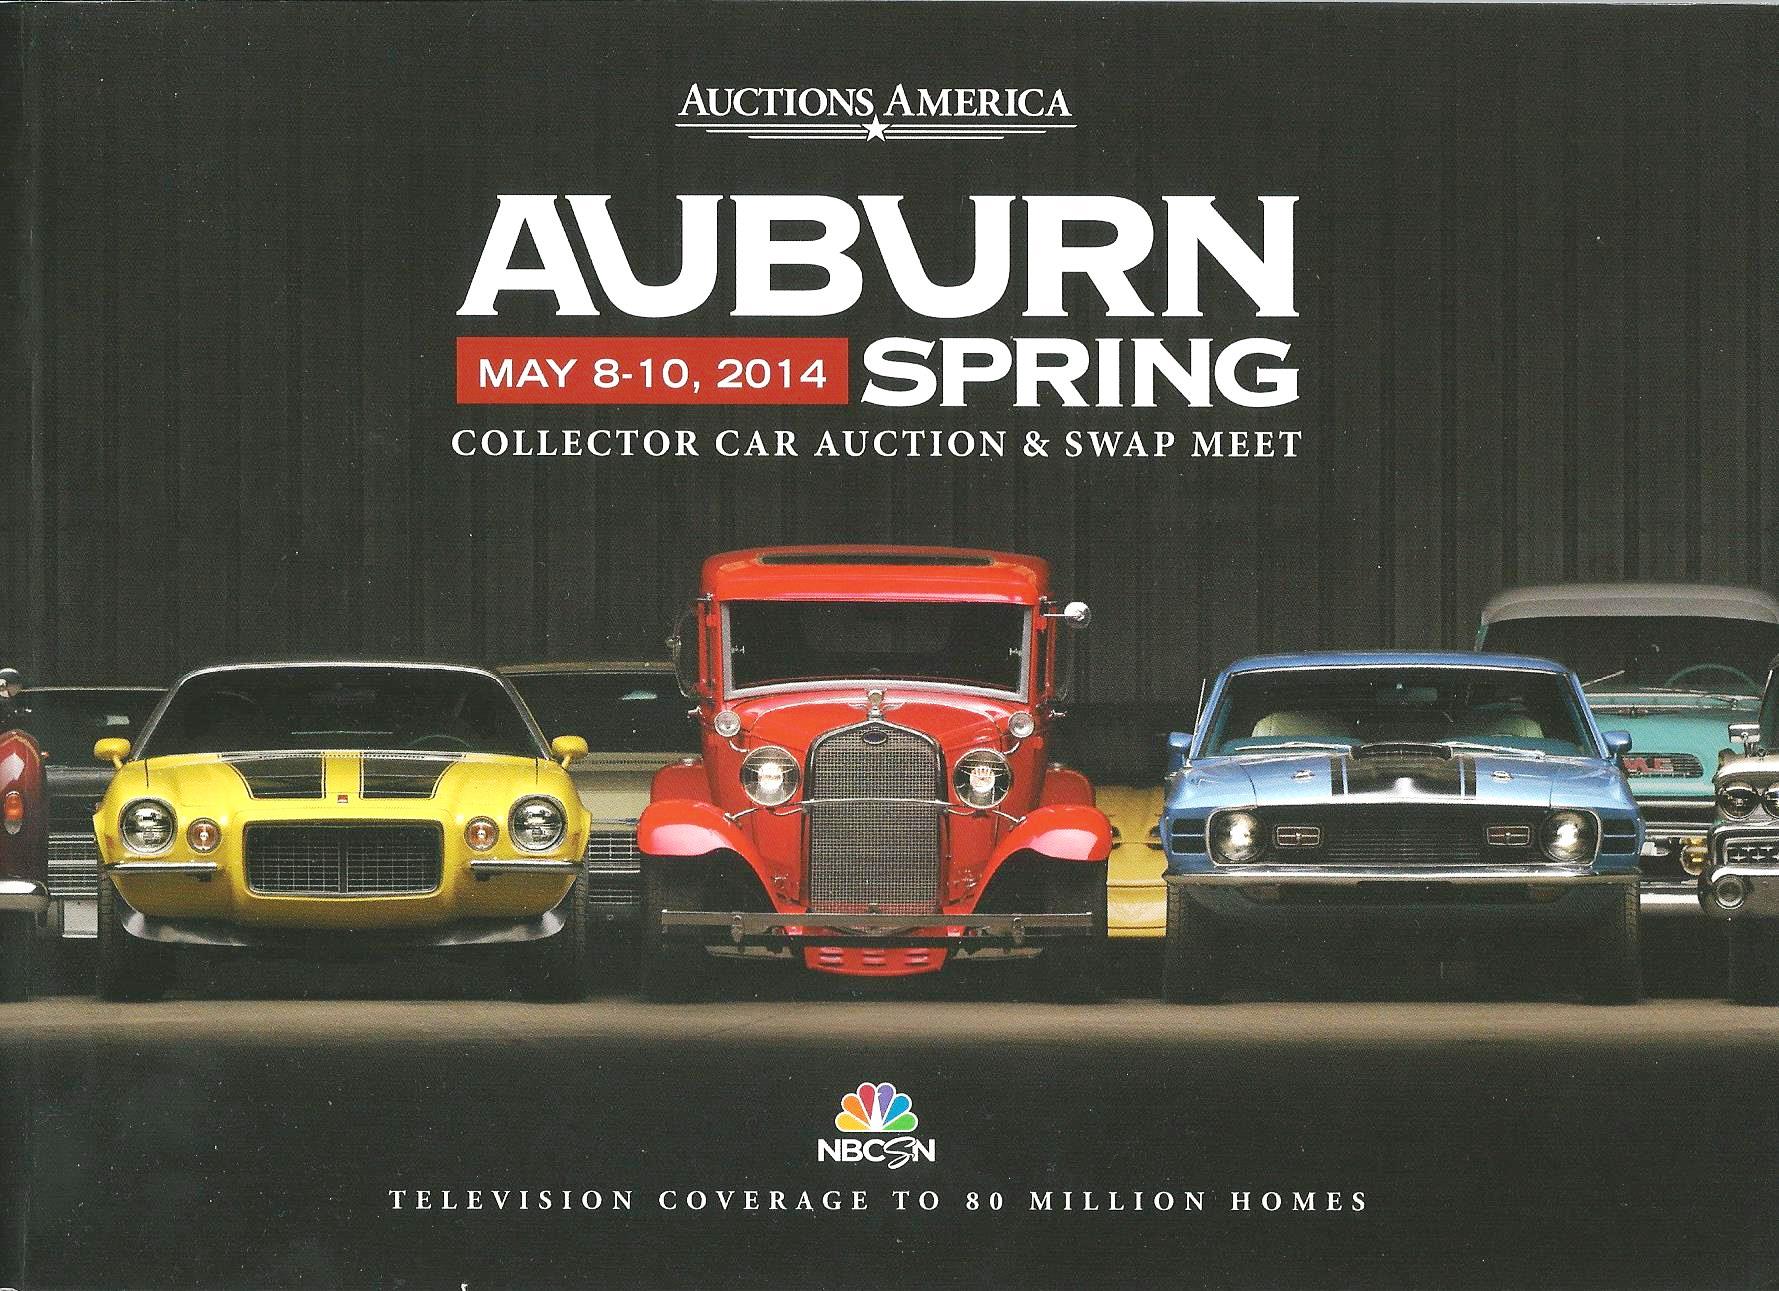 I’m Back on the Air, with NBCSN at Auctions America, Auburn